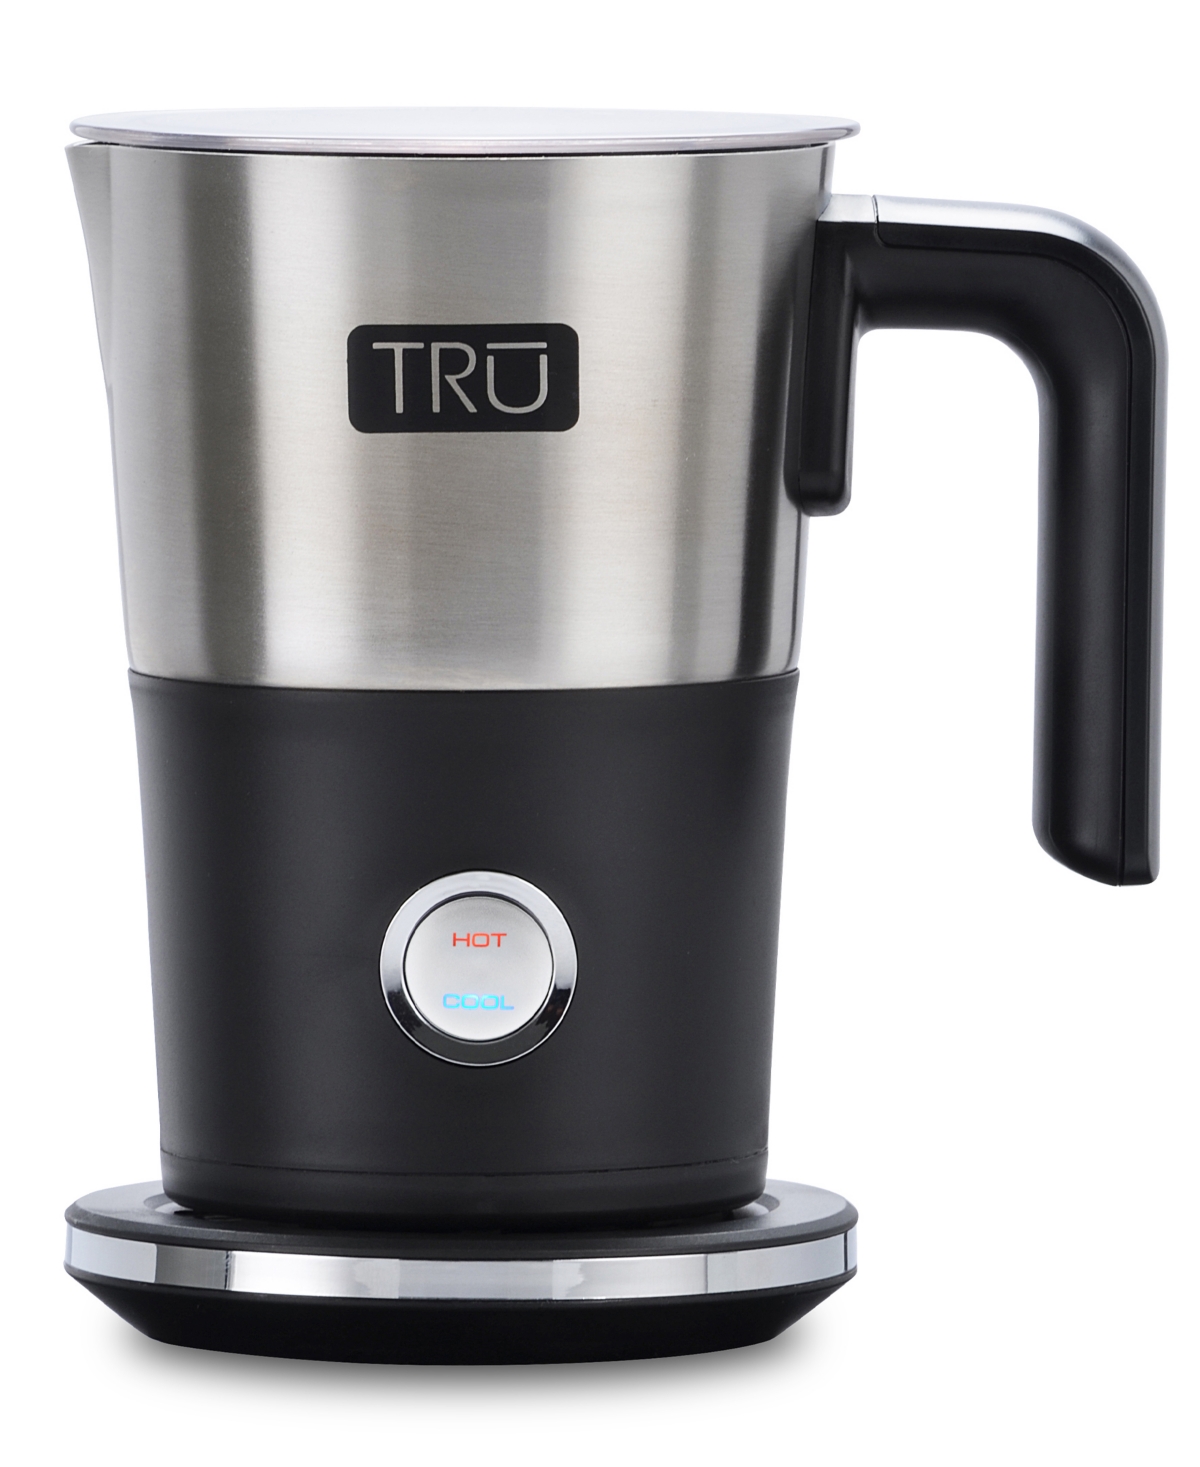 Tru Electric Milk Frother In Silver